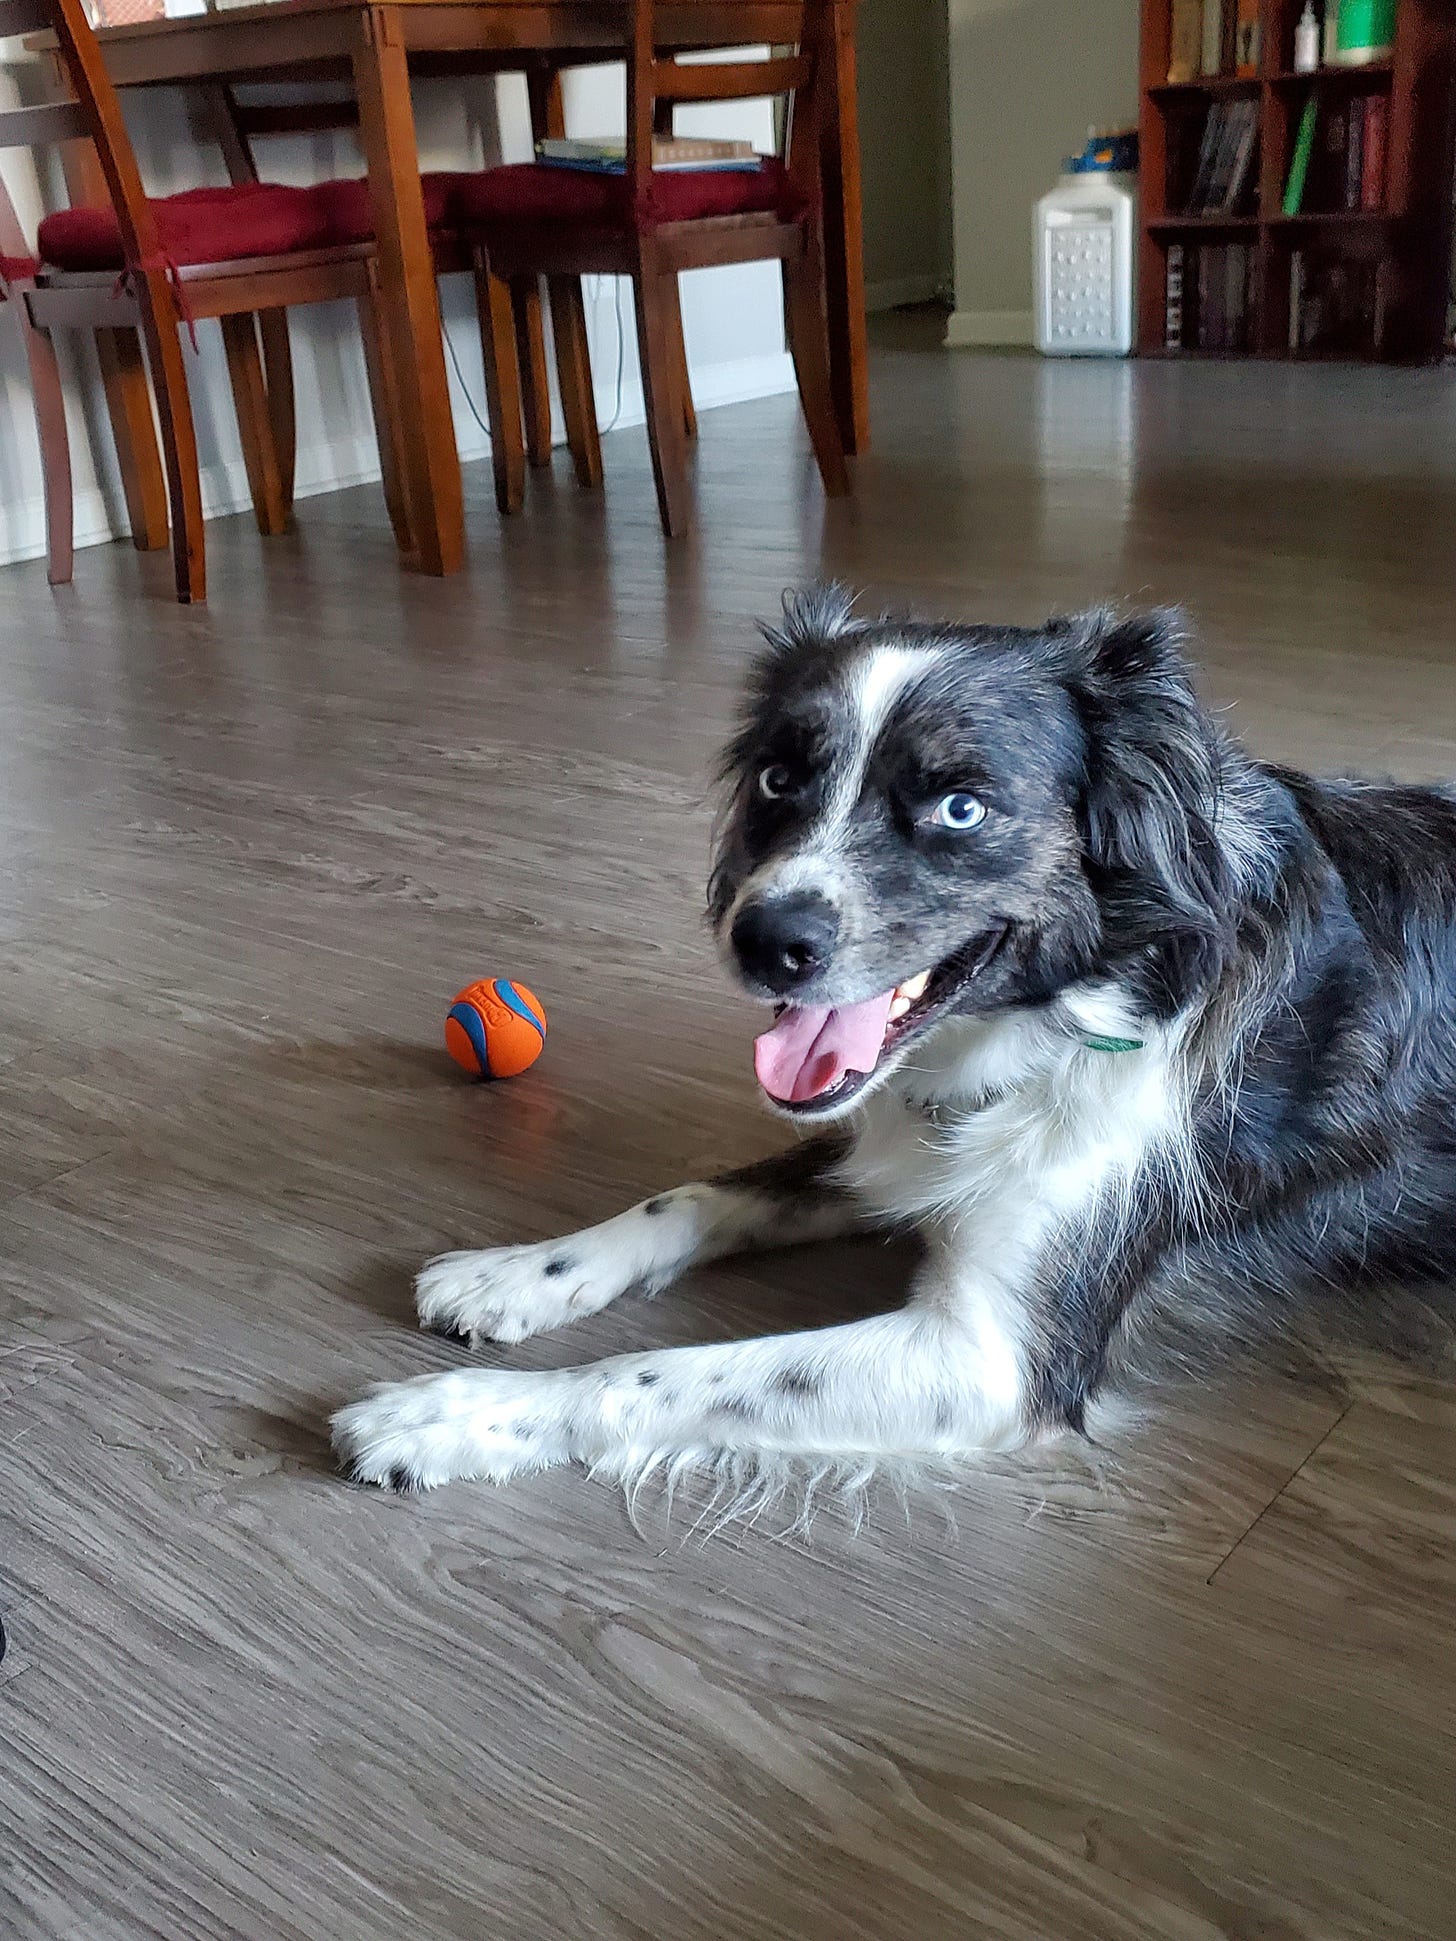 A dog with black and white fur lays on the ground with his mouth open and his eyes wide, as if smiling. A bright orange ball lays at his side.